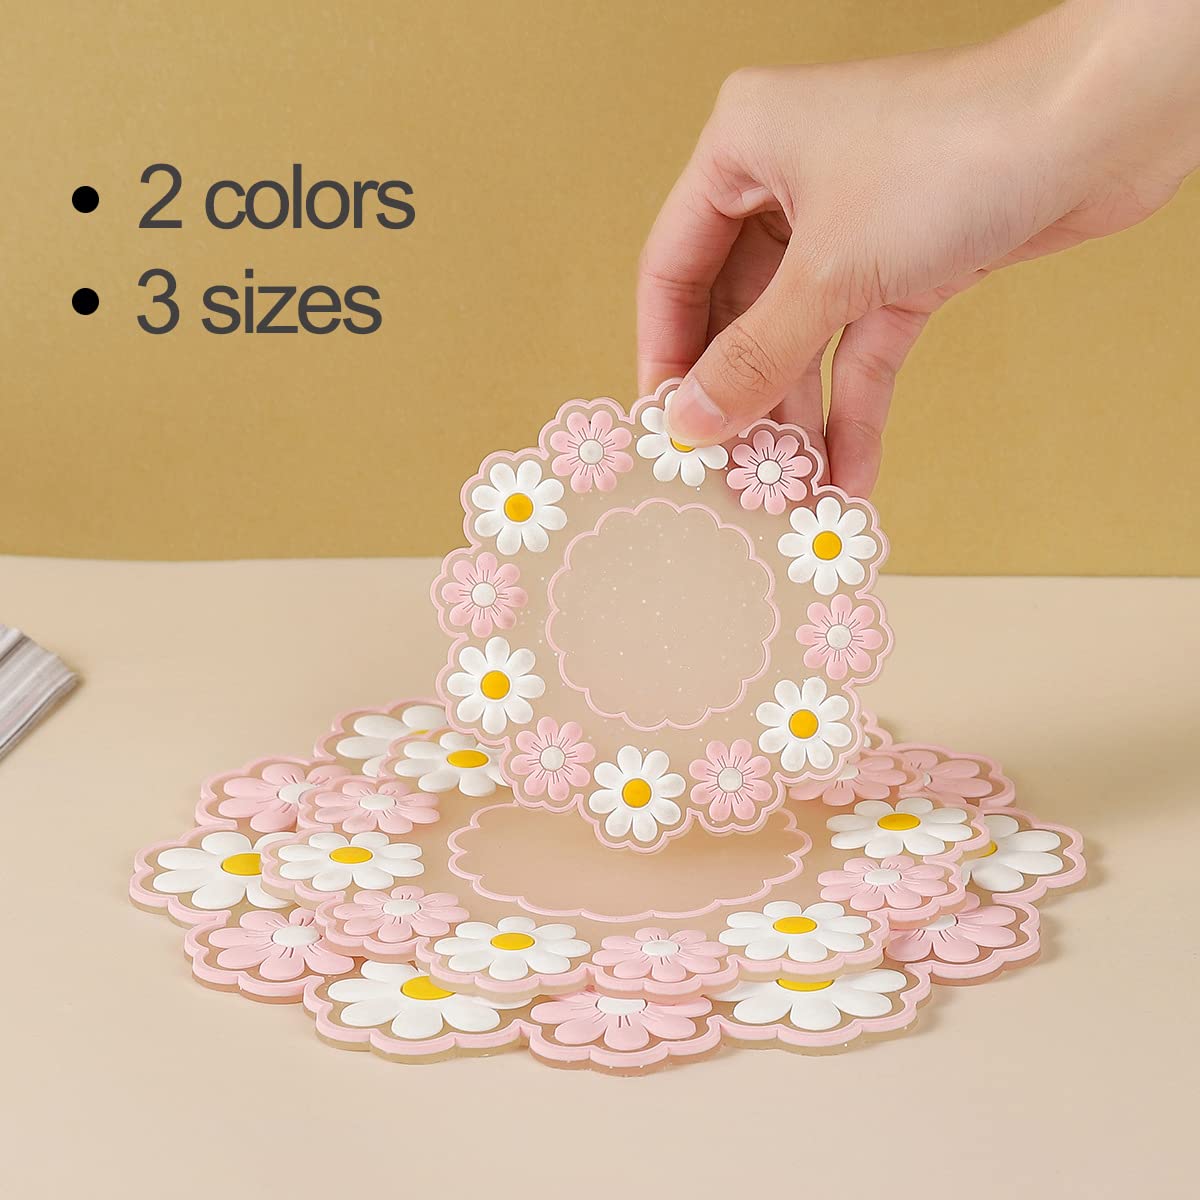 Silicone Round Placemats Set of 3, Daisy Flower Shape Heat Resistant Trivets Pot Holder Mats, Cup Potholders, Pot Holders, Non-Slip Insulation Hot Pads for Kitchen (Pink)